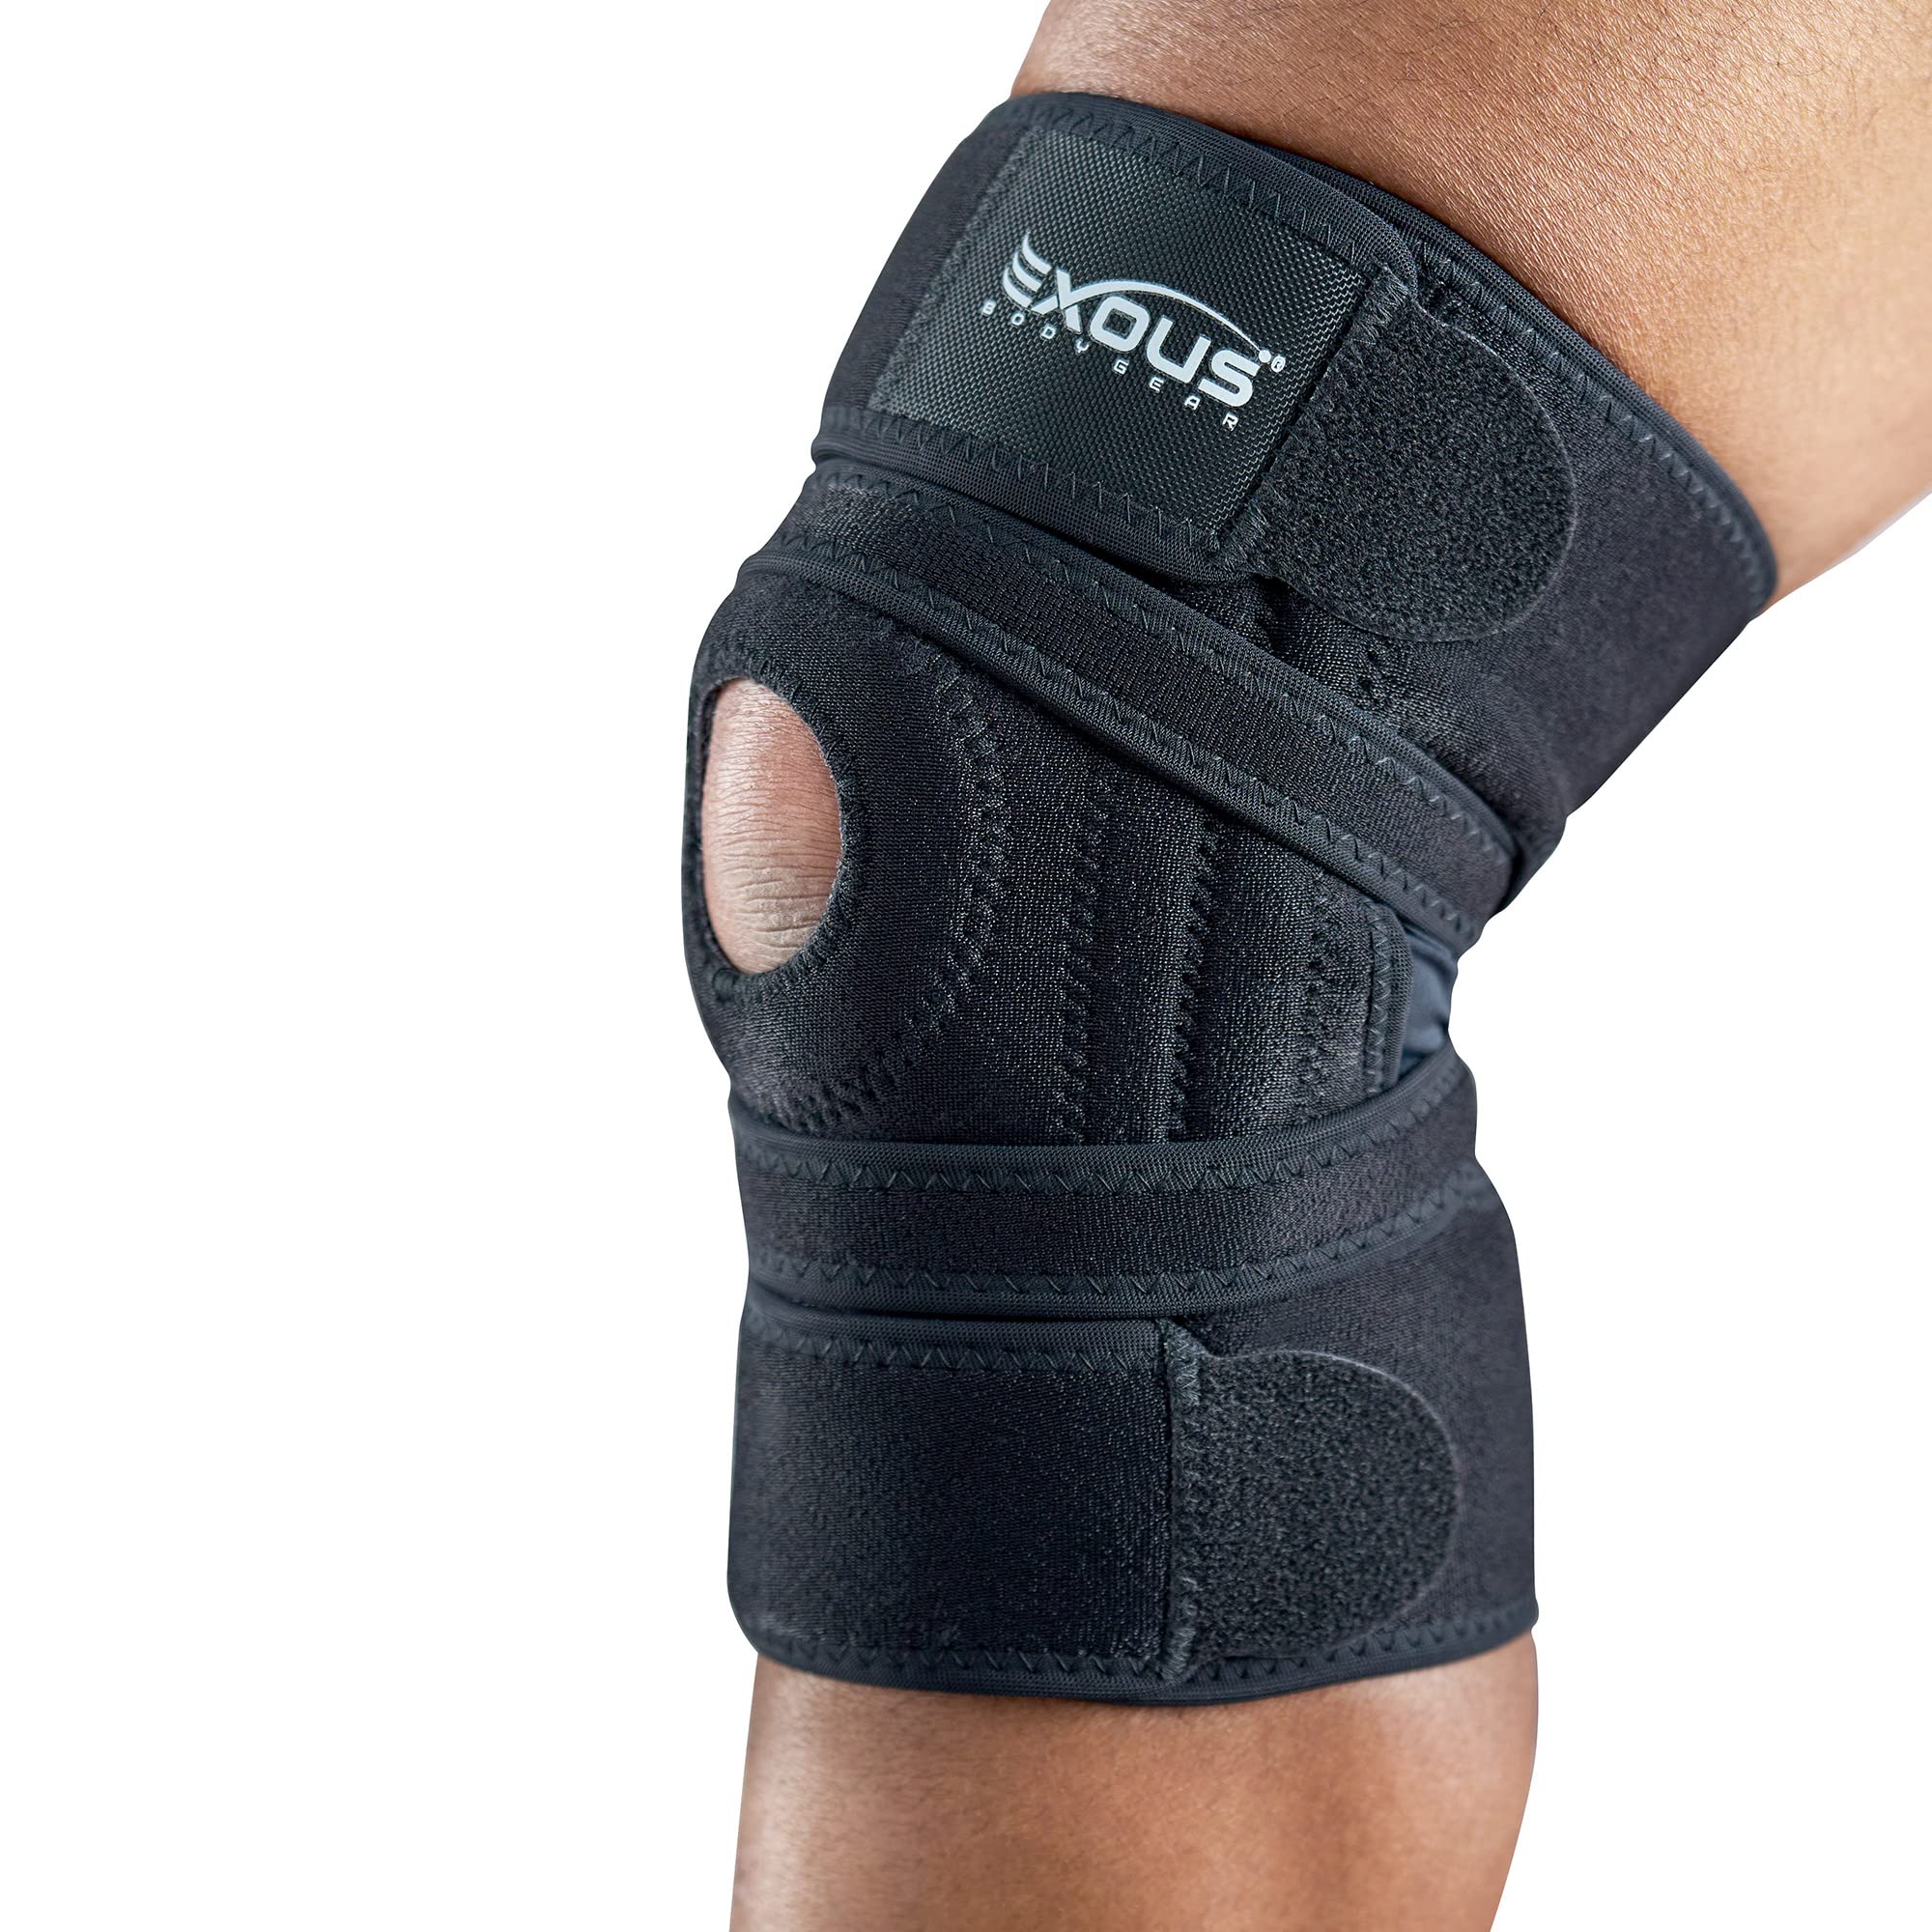 EXOUS BODYGEAR Knee Brace Meniscus Tear Support Fits Women, Men For  Arthritis Acl, Mcl Pain Patented 4-way Adjustable NonSlip Wraparound Strap  Dual Side Stabilizer For Patella Stability Size medium